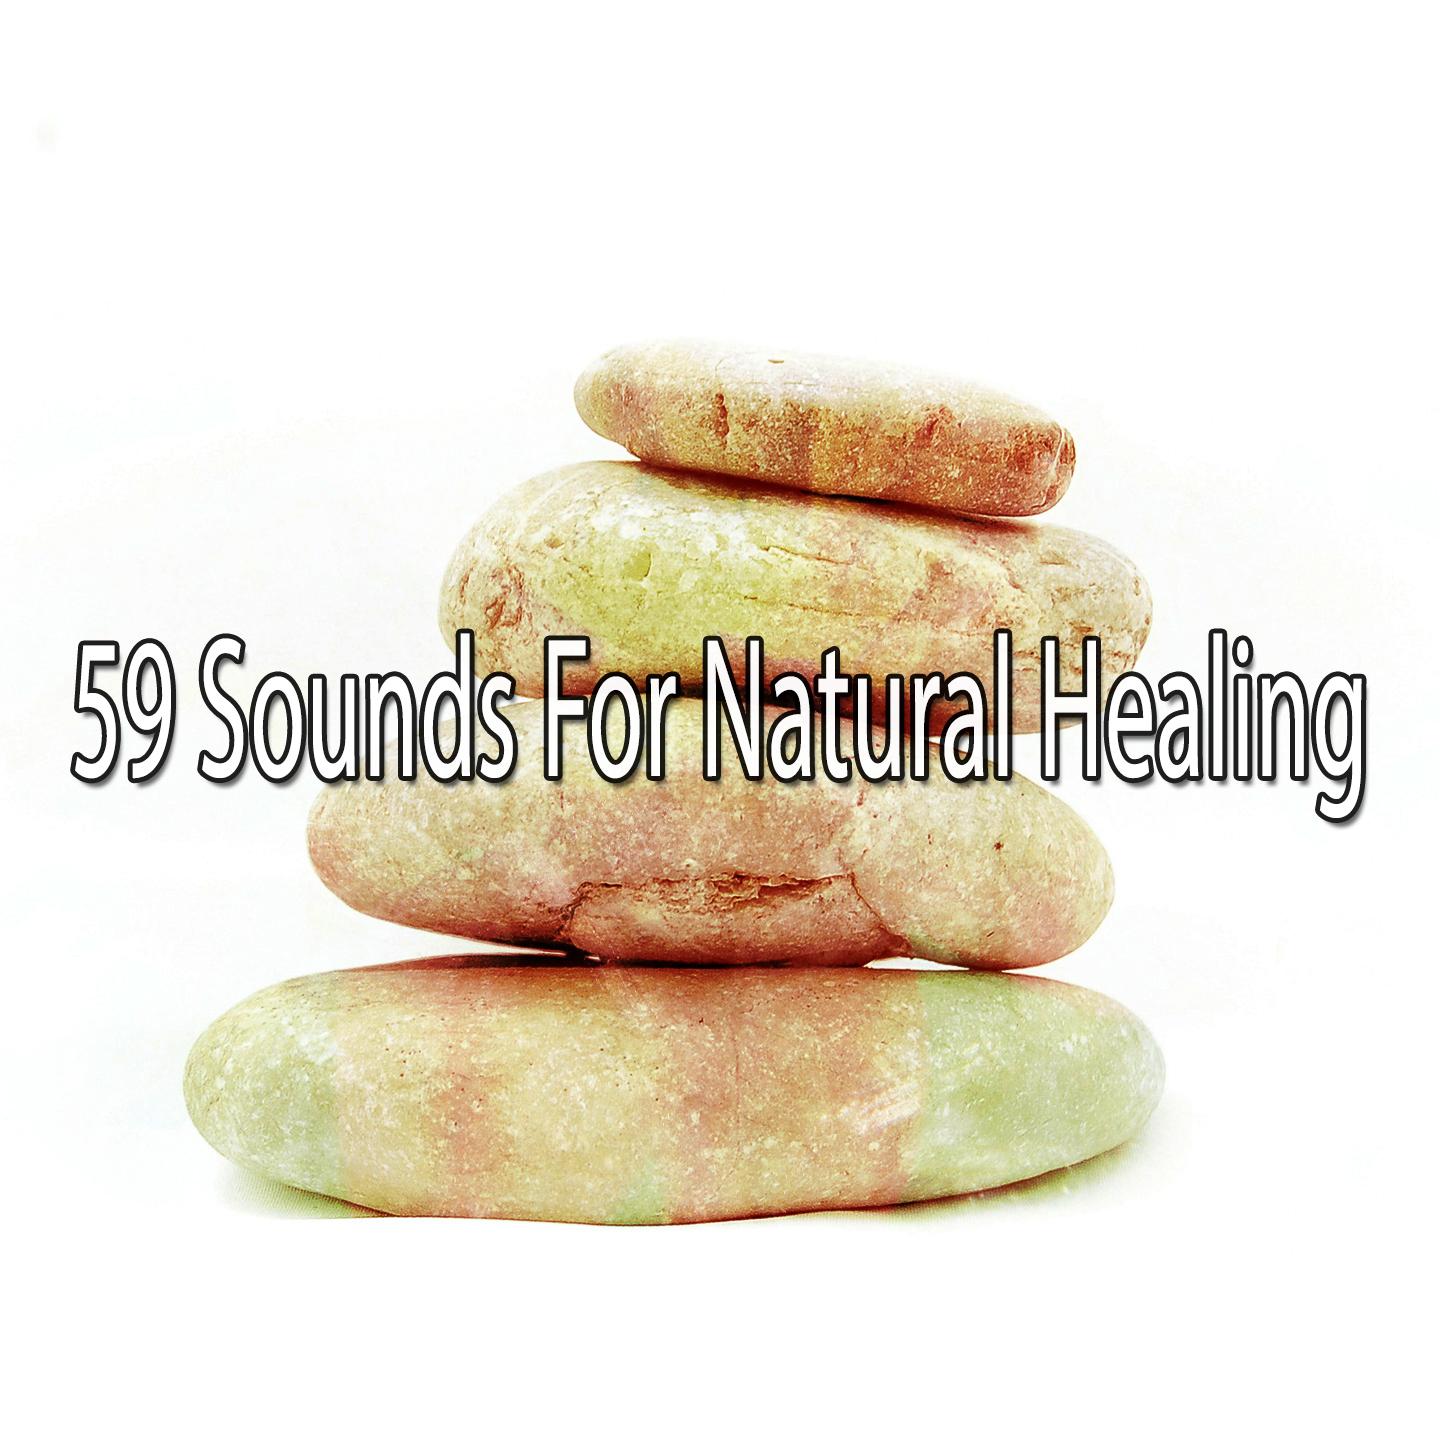 59 Sounds for Natural Healing